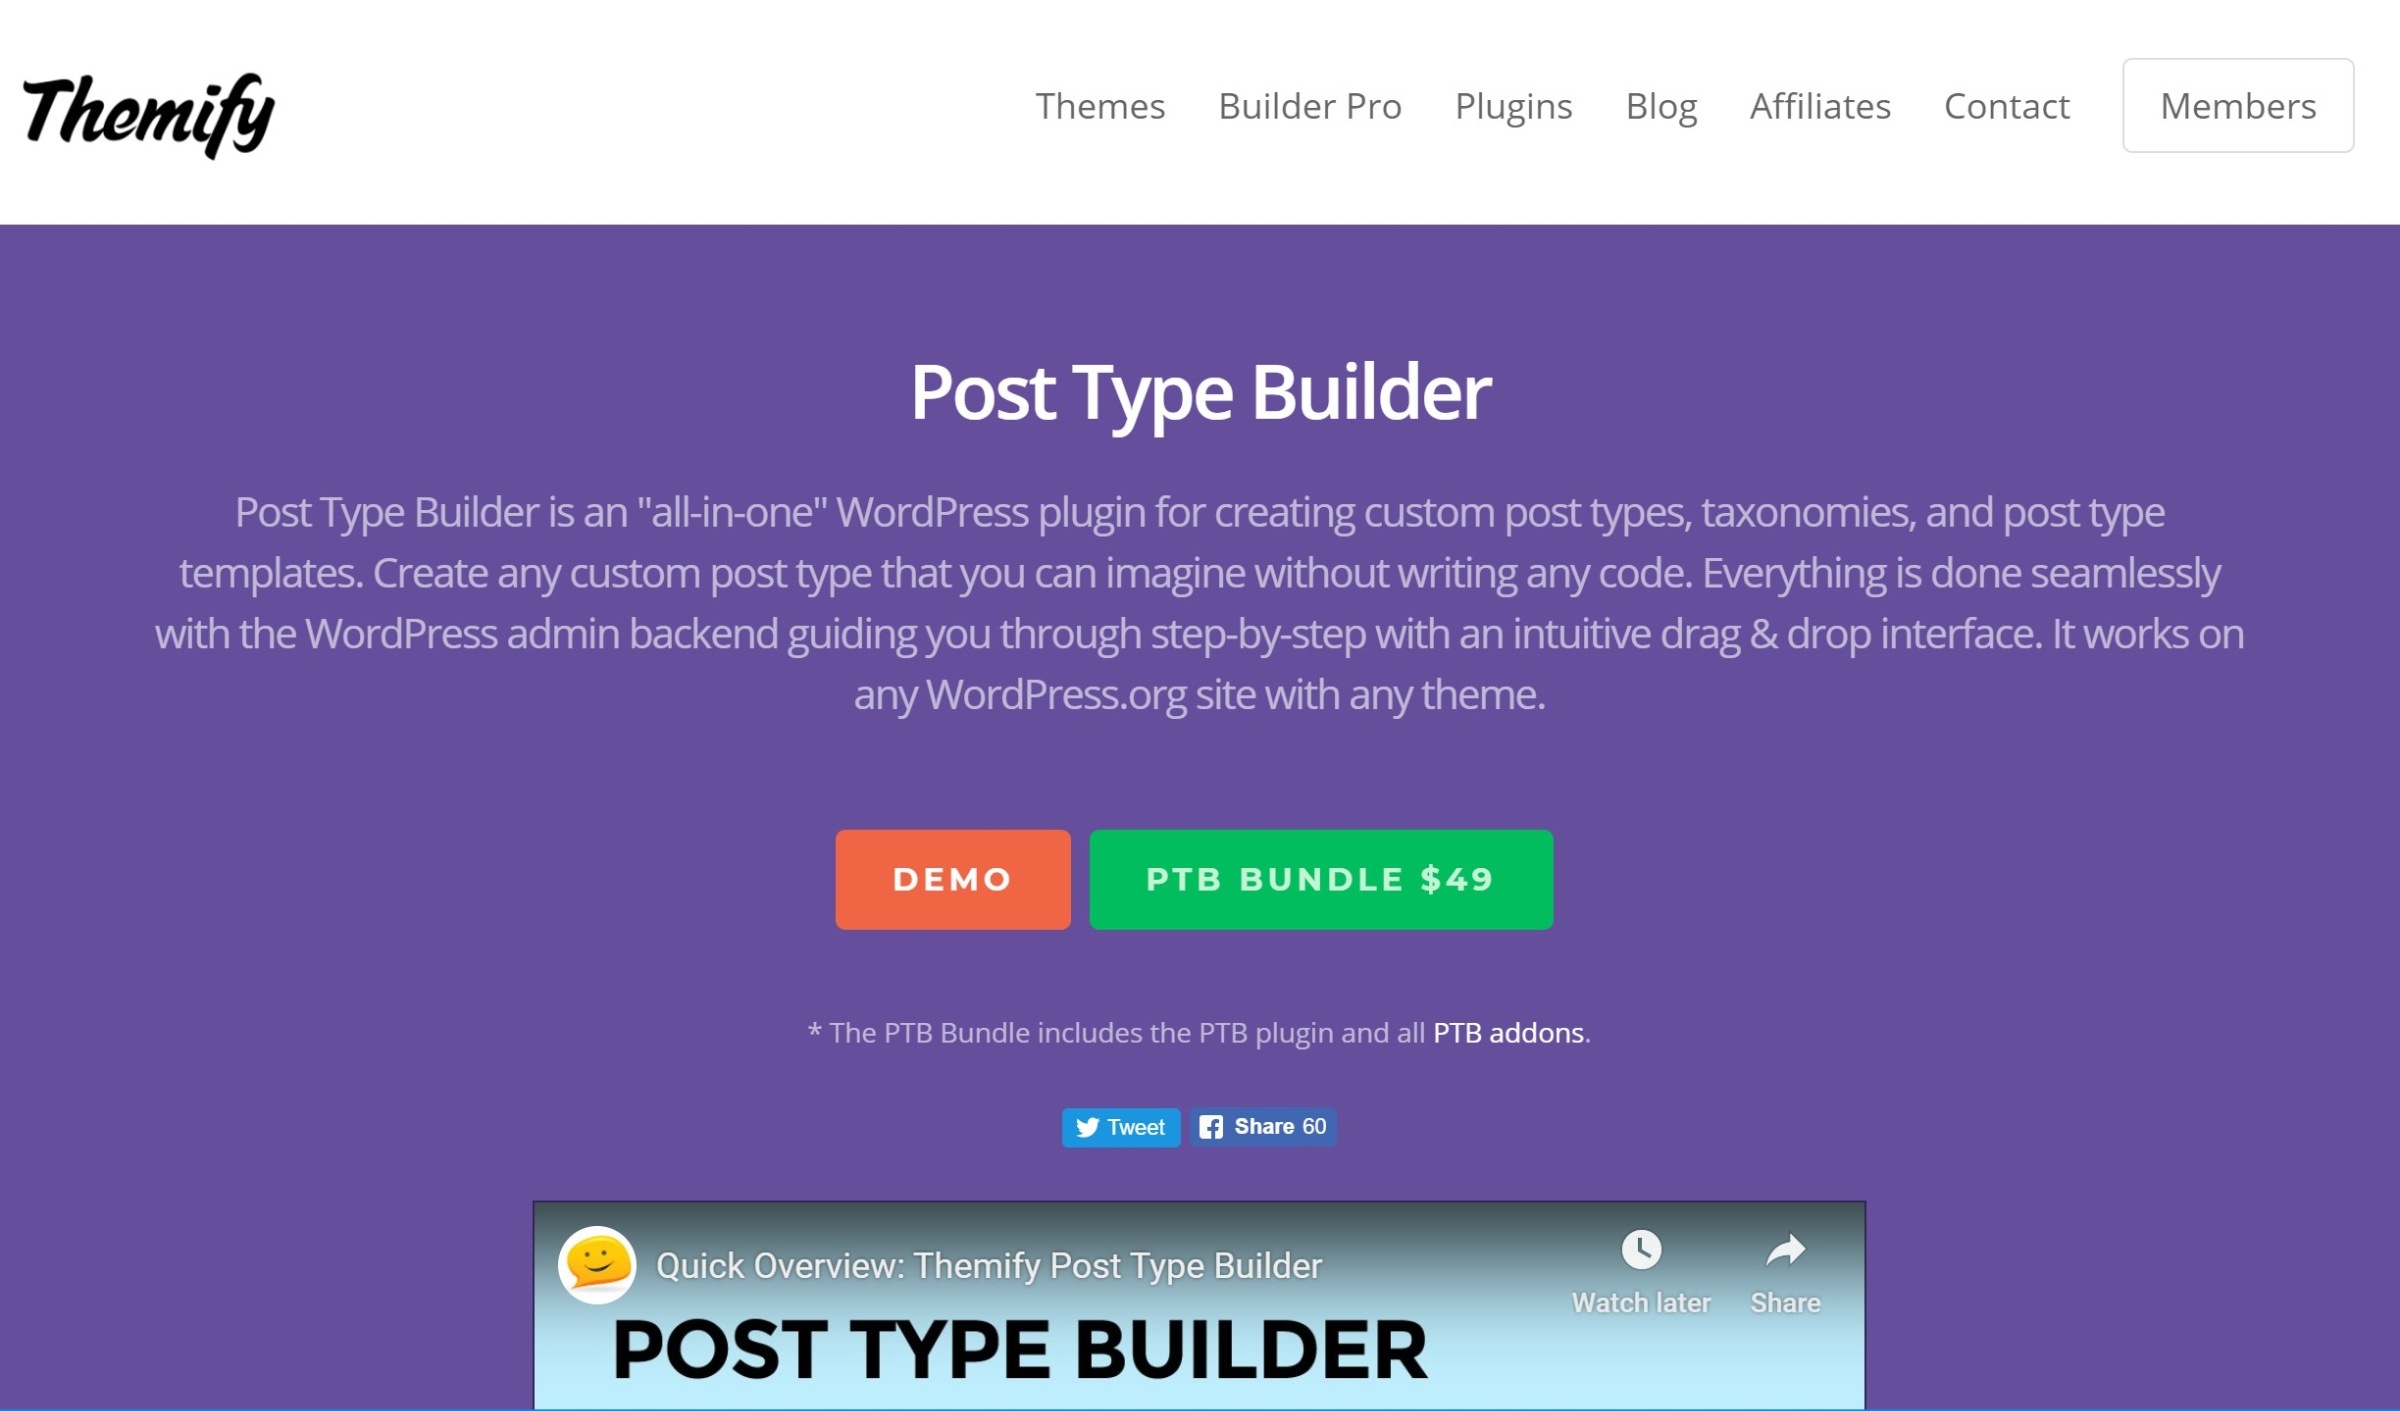 Themify Post Type Builder plugin